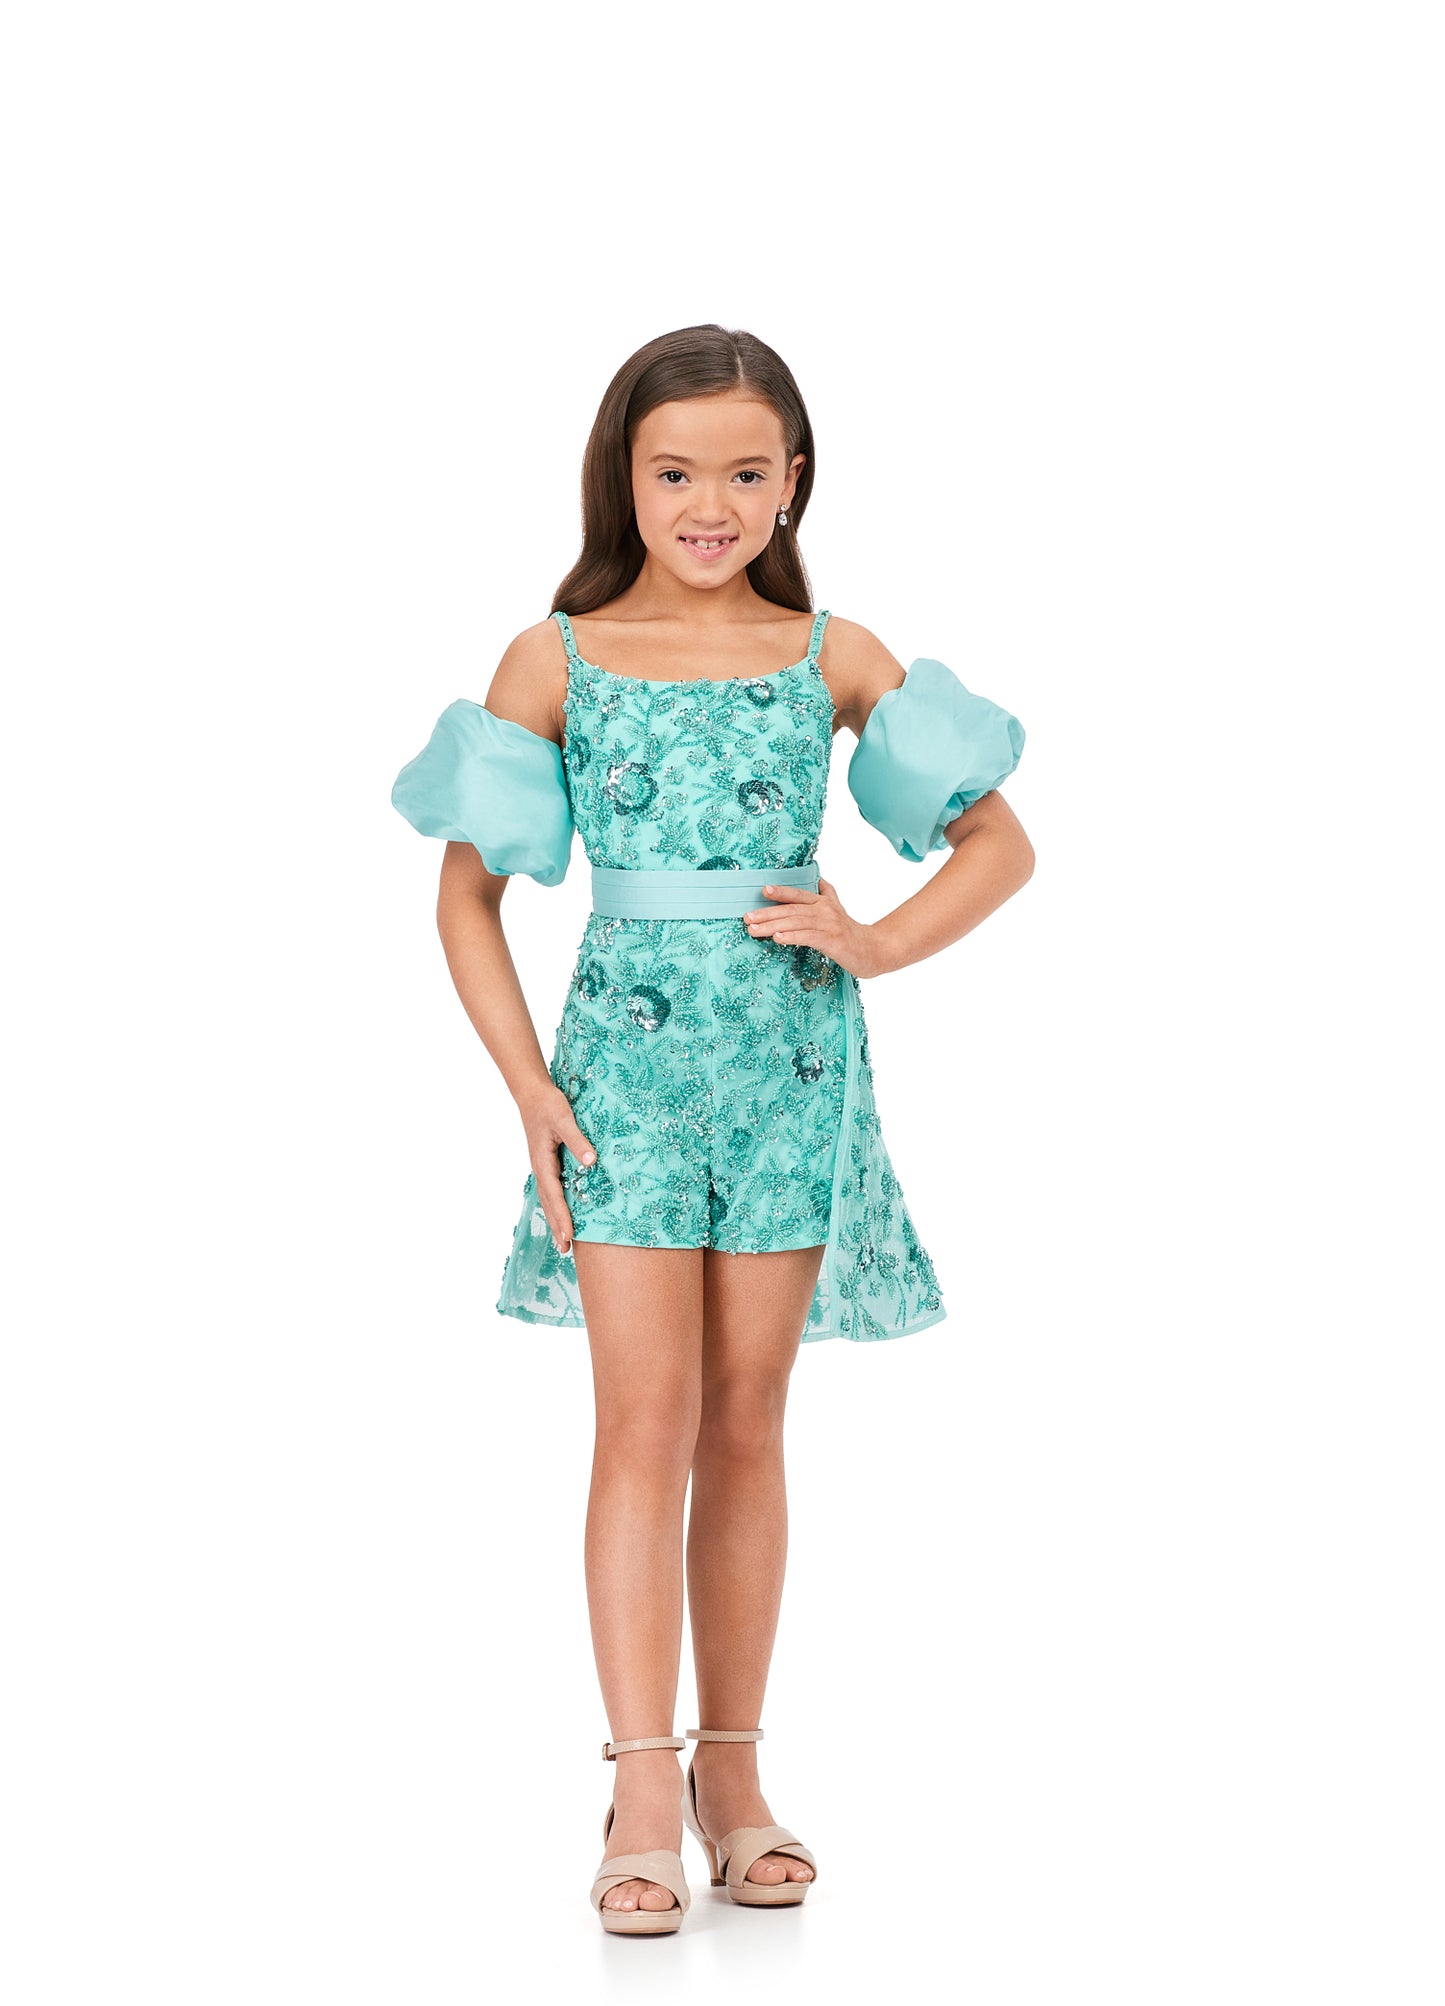 Ashley Lauren Kids 8233 Fully Beaded Spaghetti Straps With Detachable Puff Sleeves Detachable Overskirt Romper. Have the most fun in this beaded romper complete with detachable puff sleeves and an overskirt!